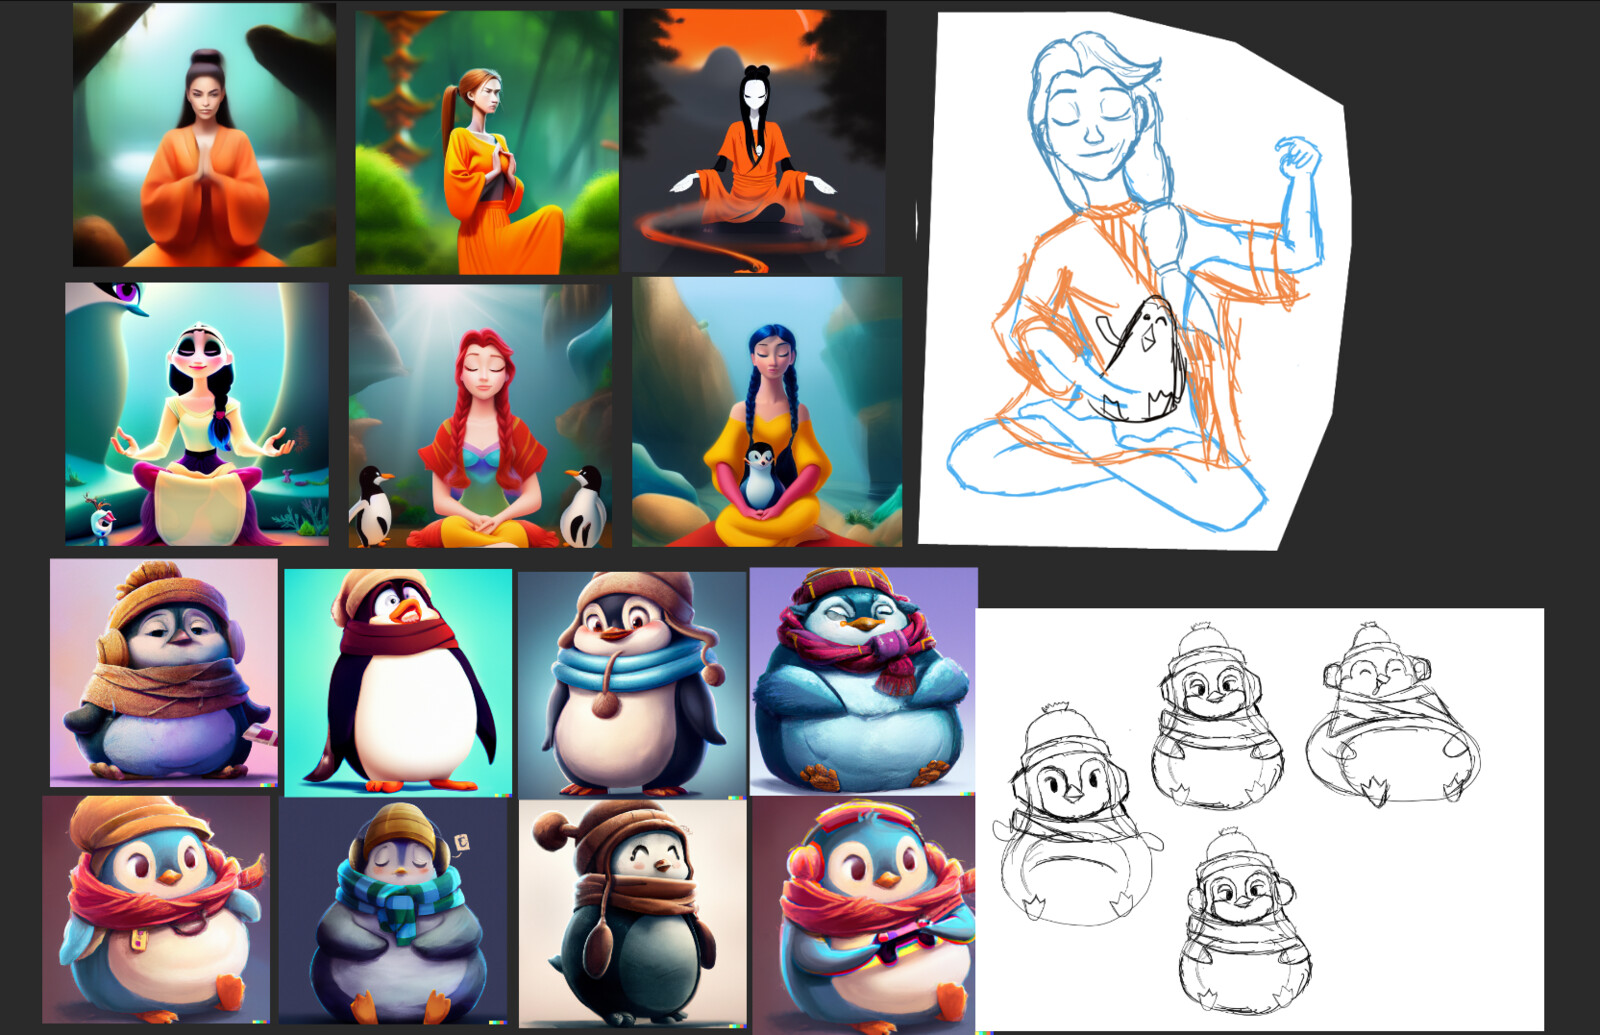 For coming up with the concept, I started with the prompt word "Zen" and I came to the idea of sculpting a girl meditating with a Zen Penguin. I used Stable Diffusion to brainstorm some concepts and then did some rough sketches